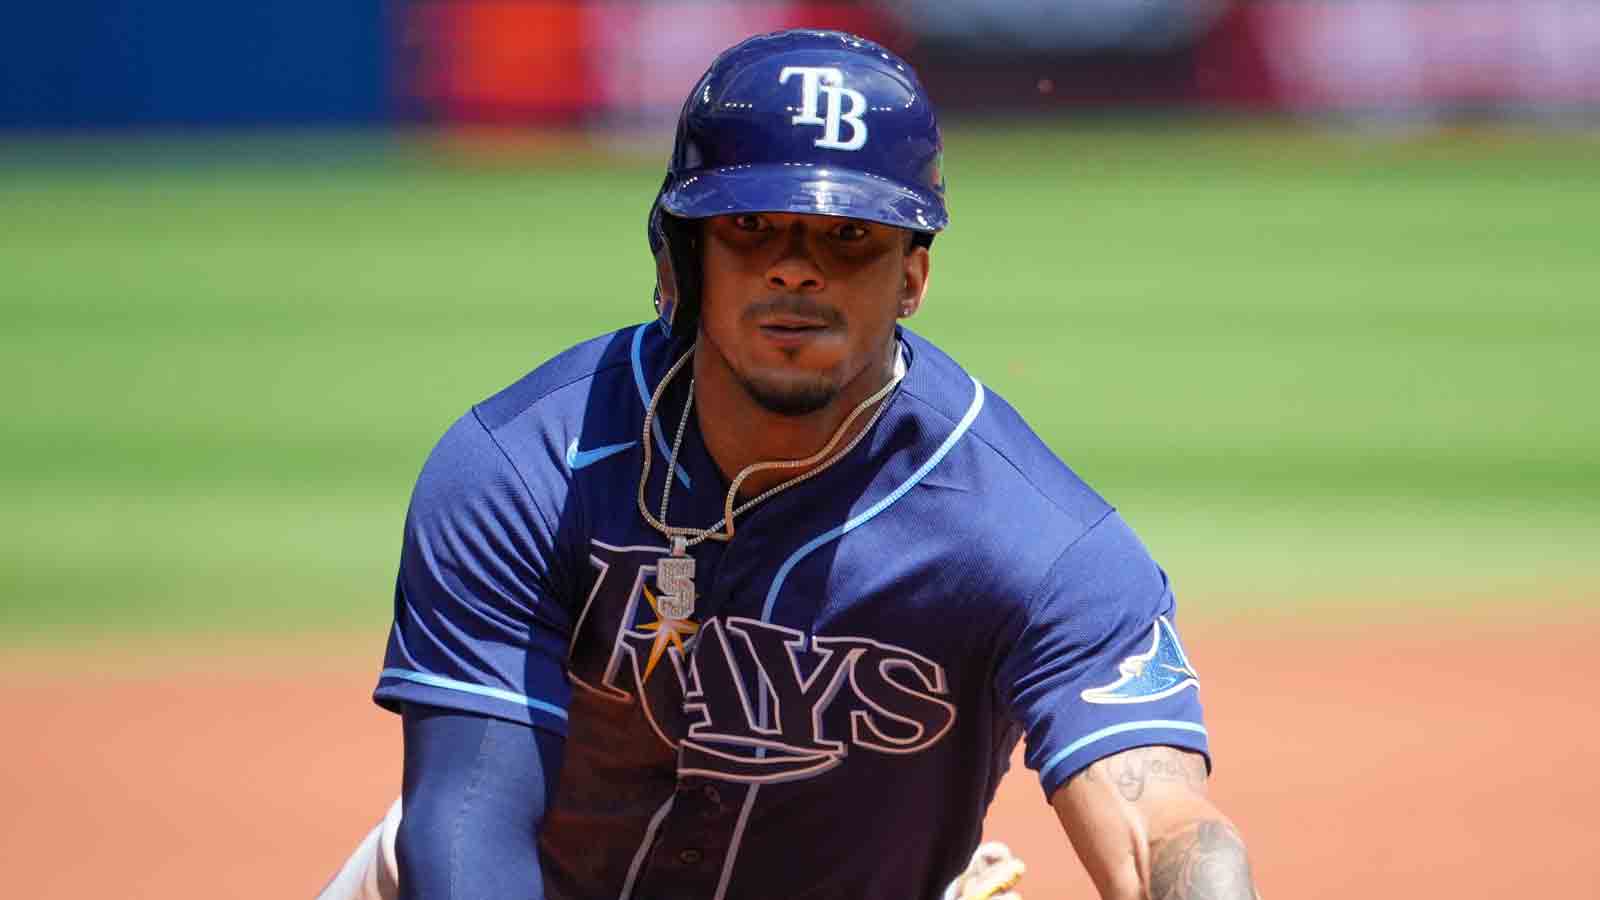 Report: Rays' Wander Franco has $650K in jewelry stolen from vehicle – NBC  Sports Bay Area & California